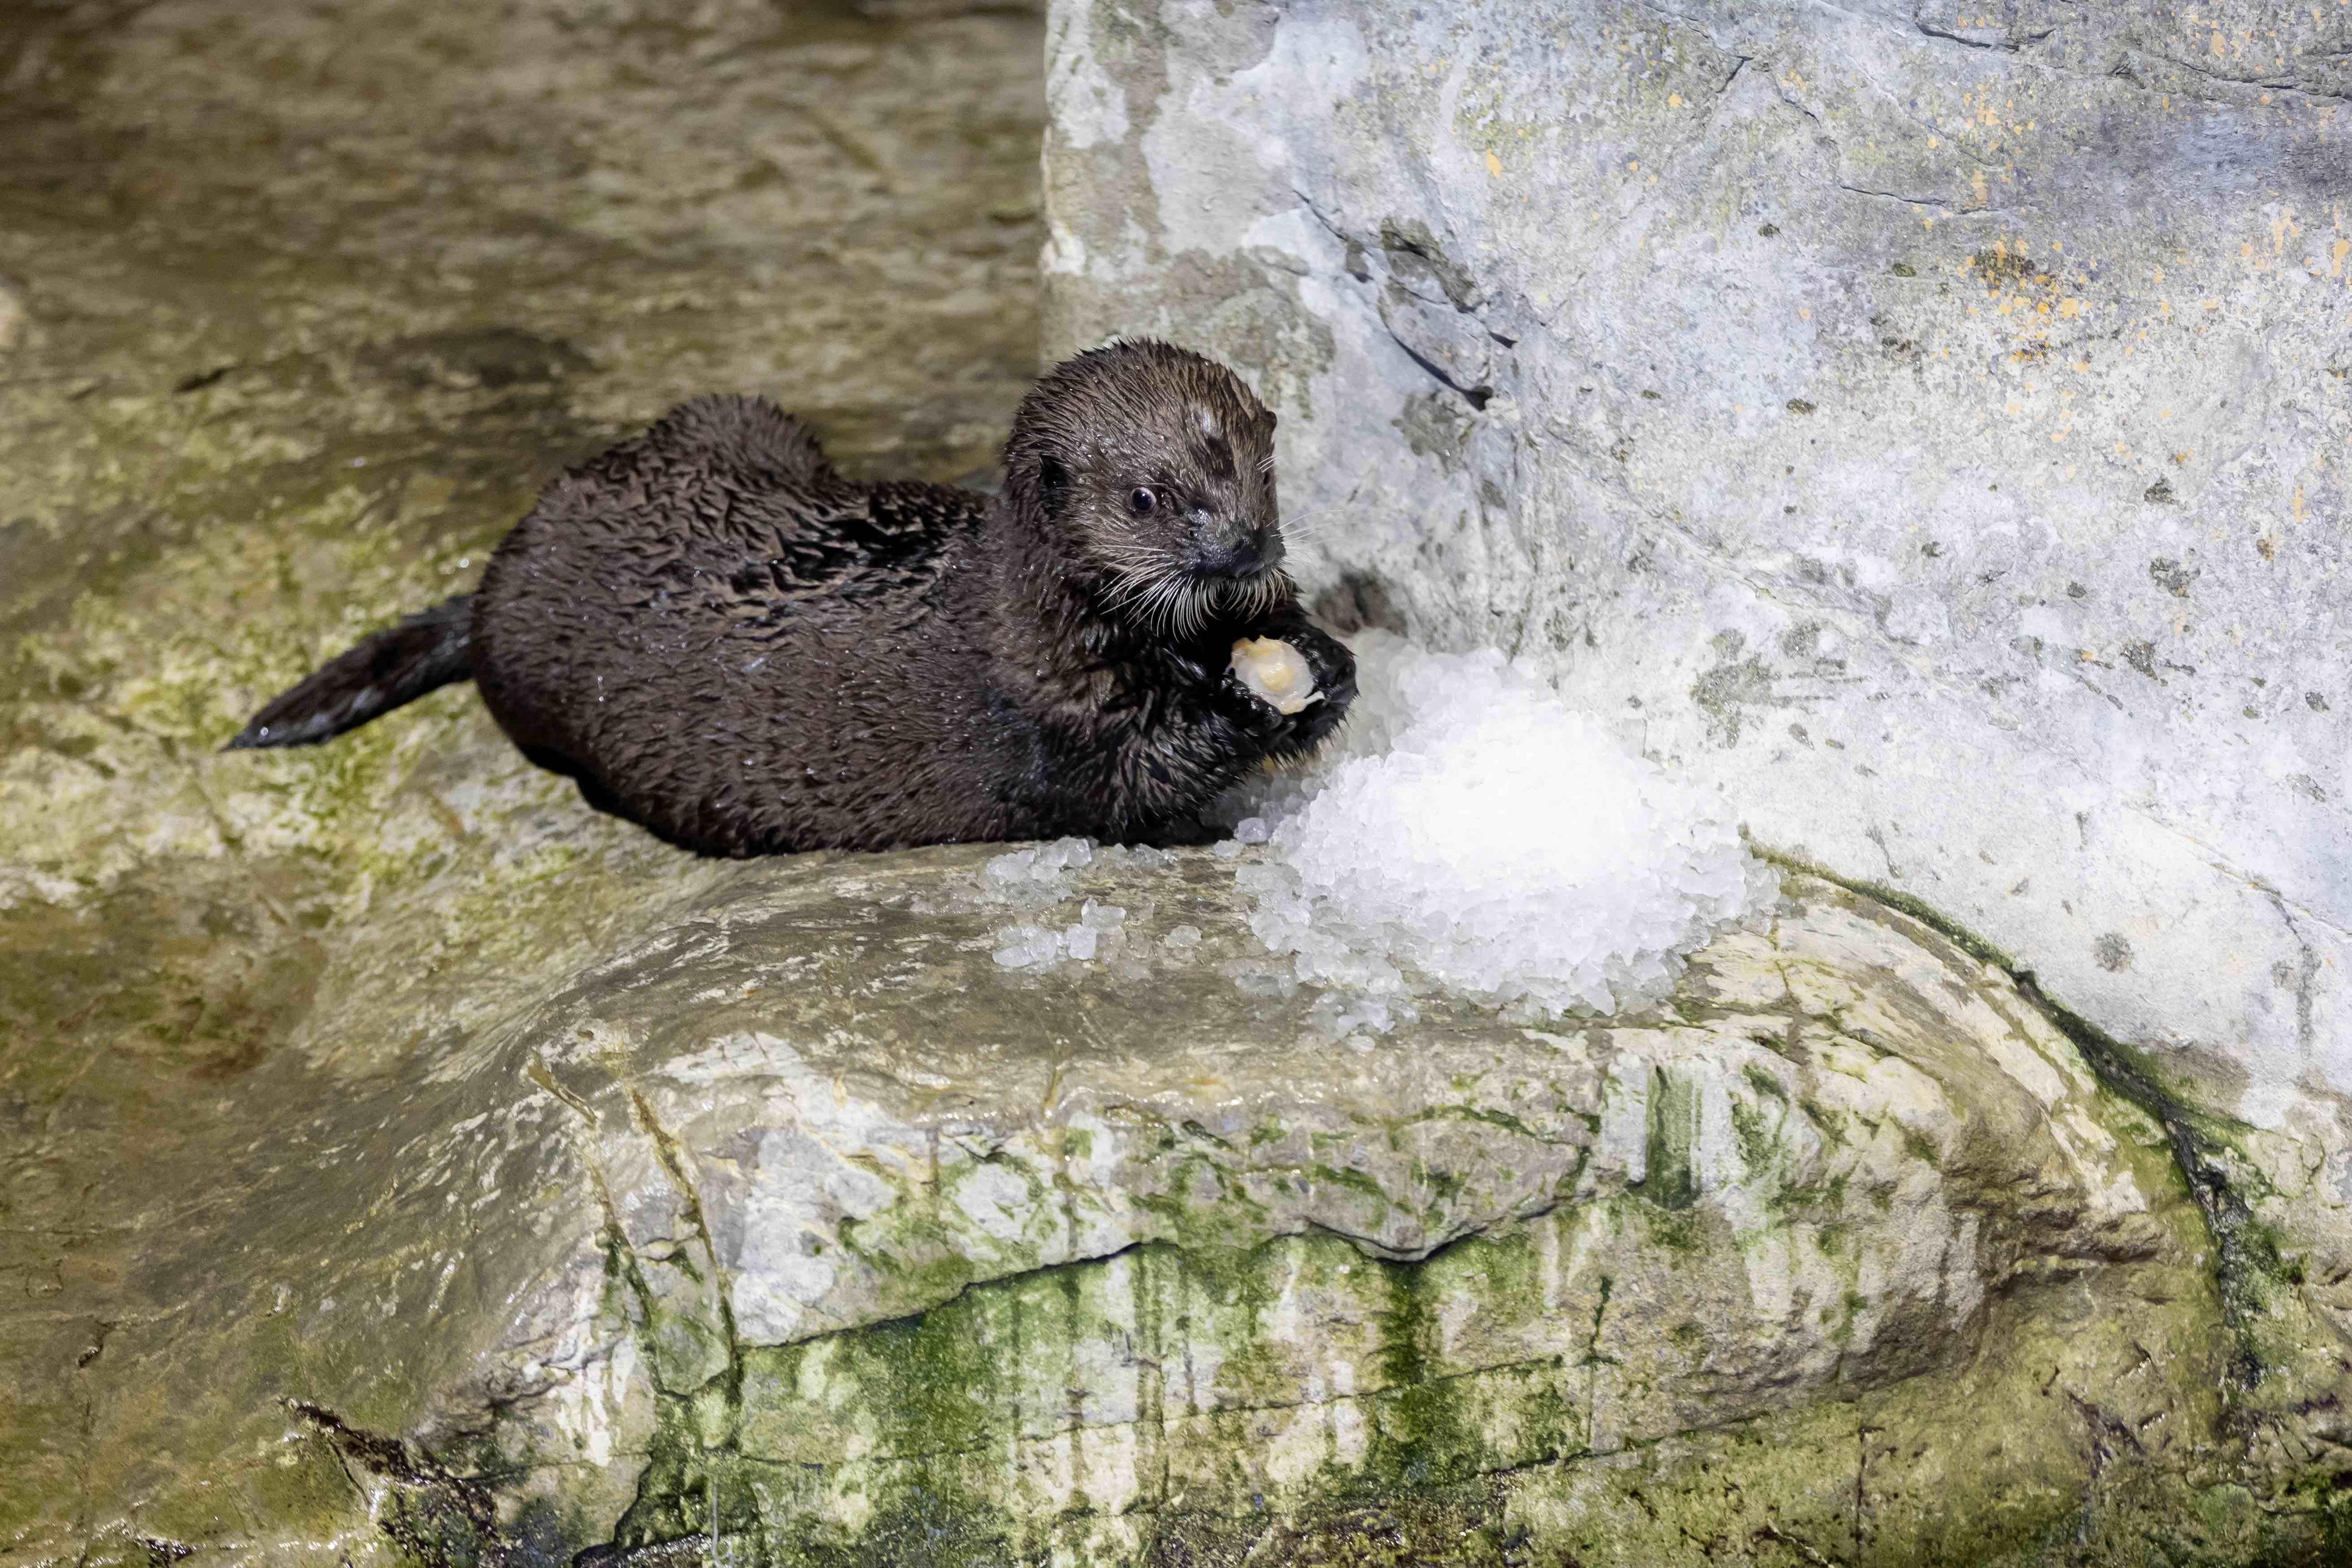 The pup arrived at Shedd weighing 10 pounds and was hand-fed bottled formula. He’s now up to 20 pounds and learning to forage for his own meals. (Brenna Hernandez / Shedd Aquarium)